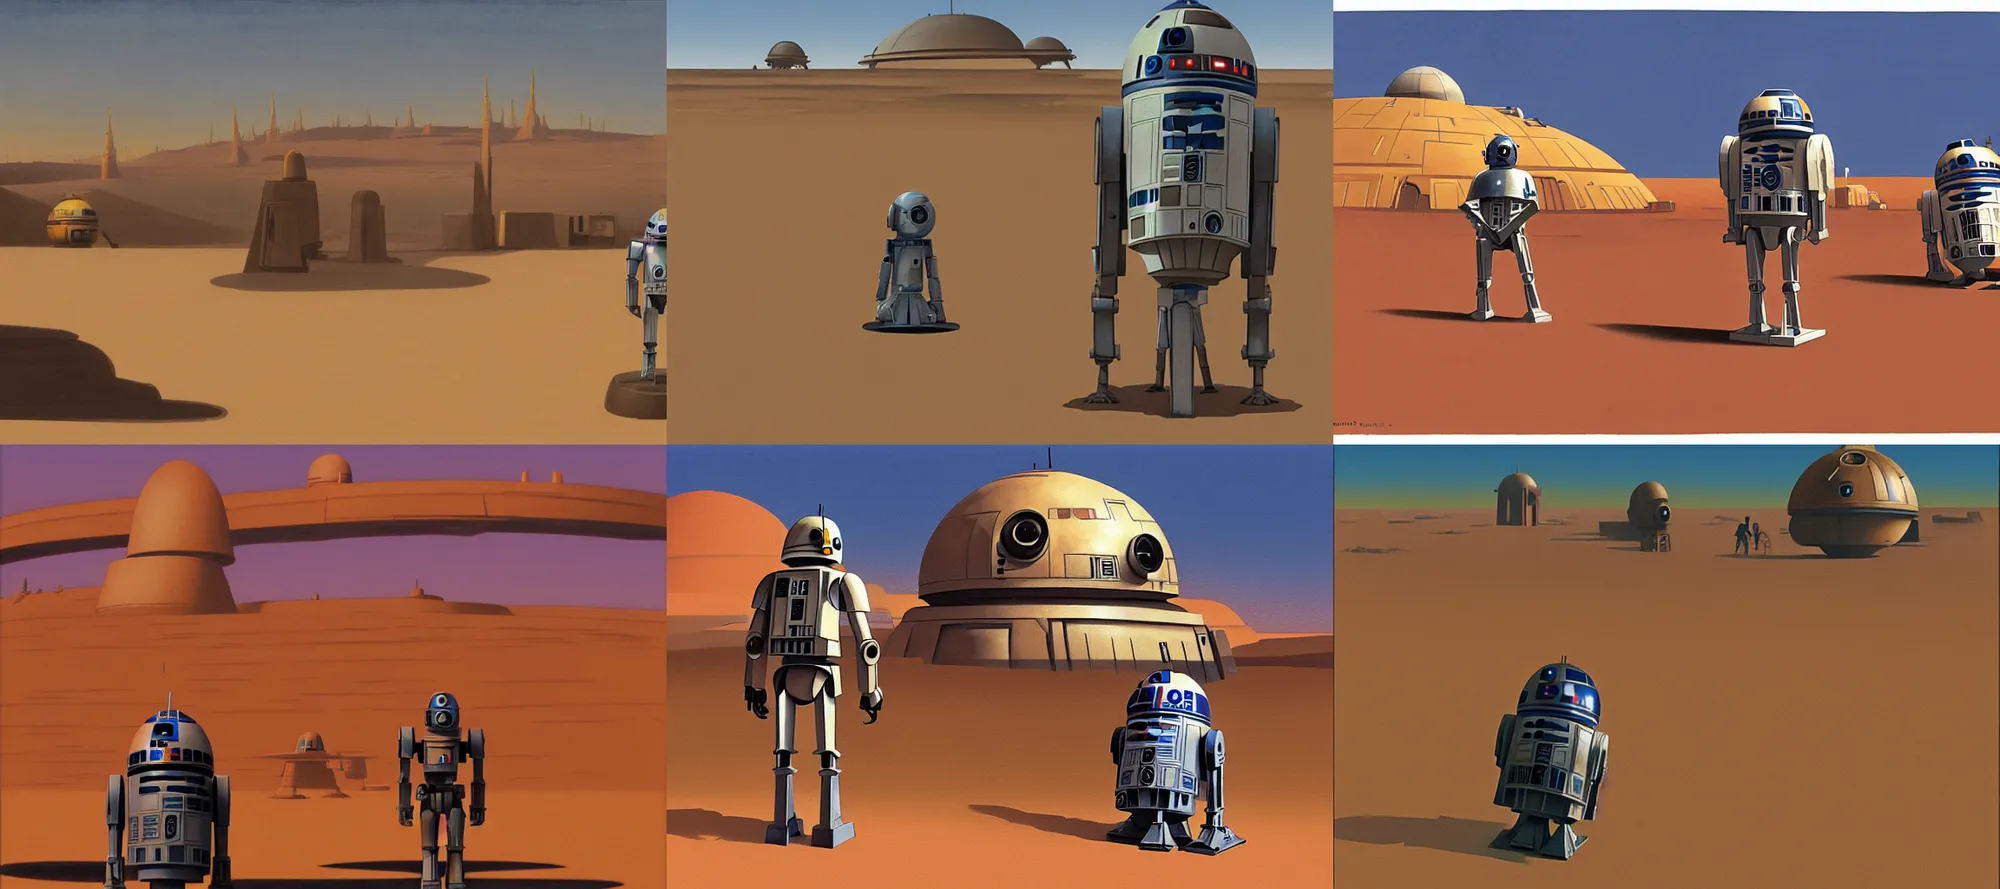 Prompt: a Star Wars droid standing in a Tatooine town by Ralph McQuarrie